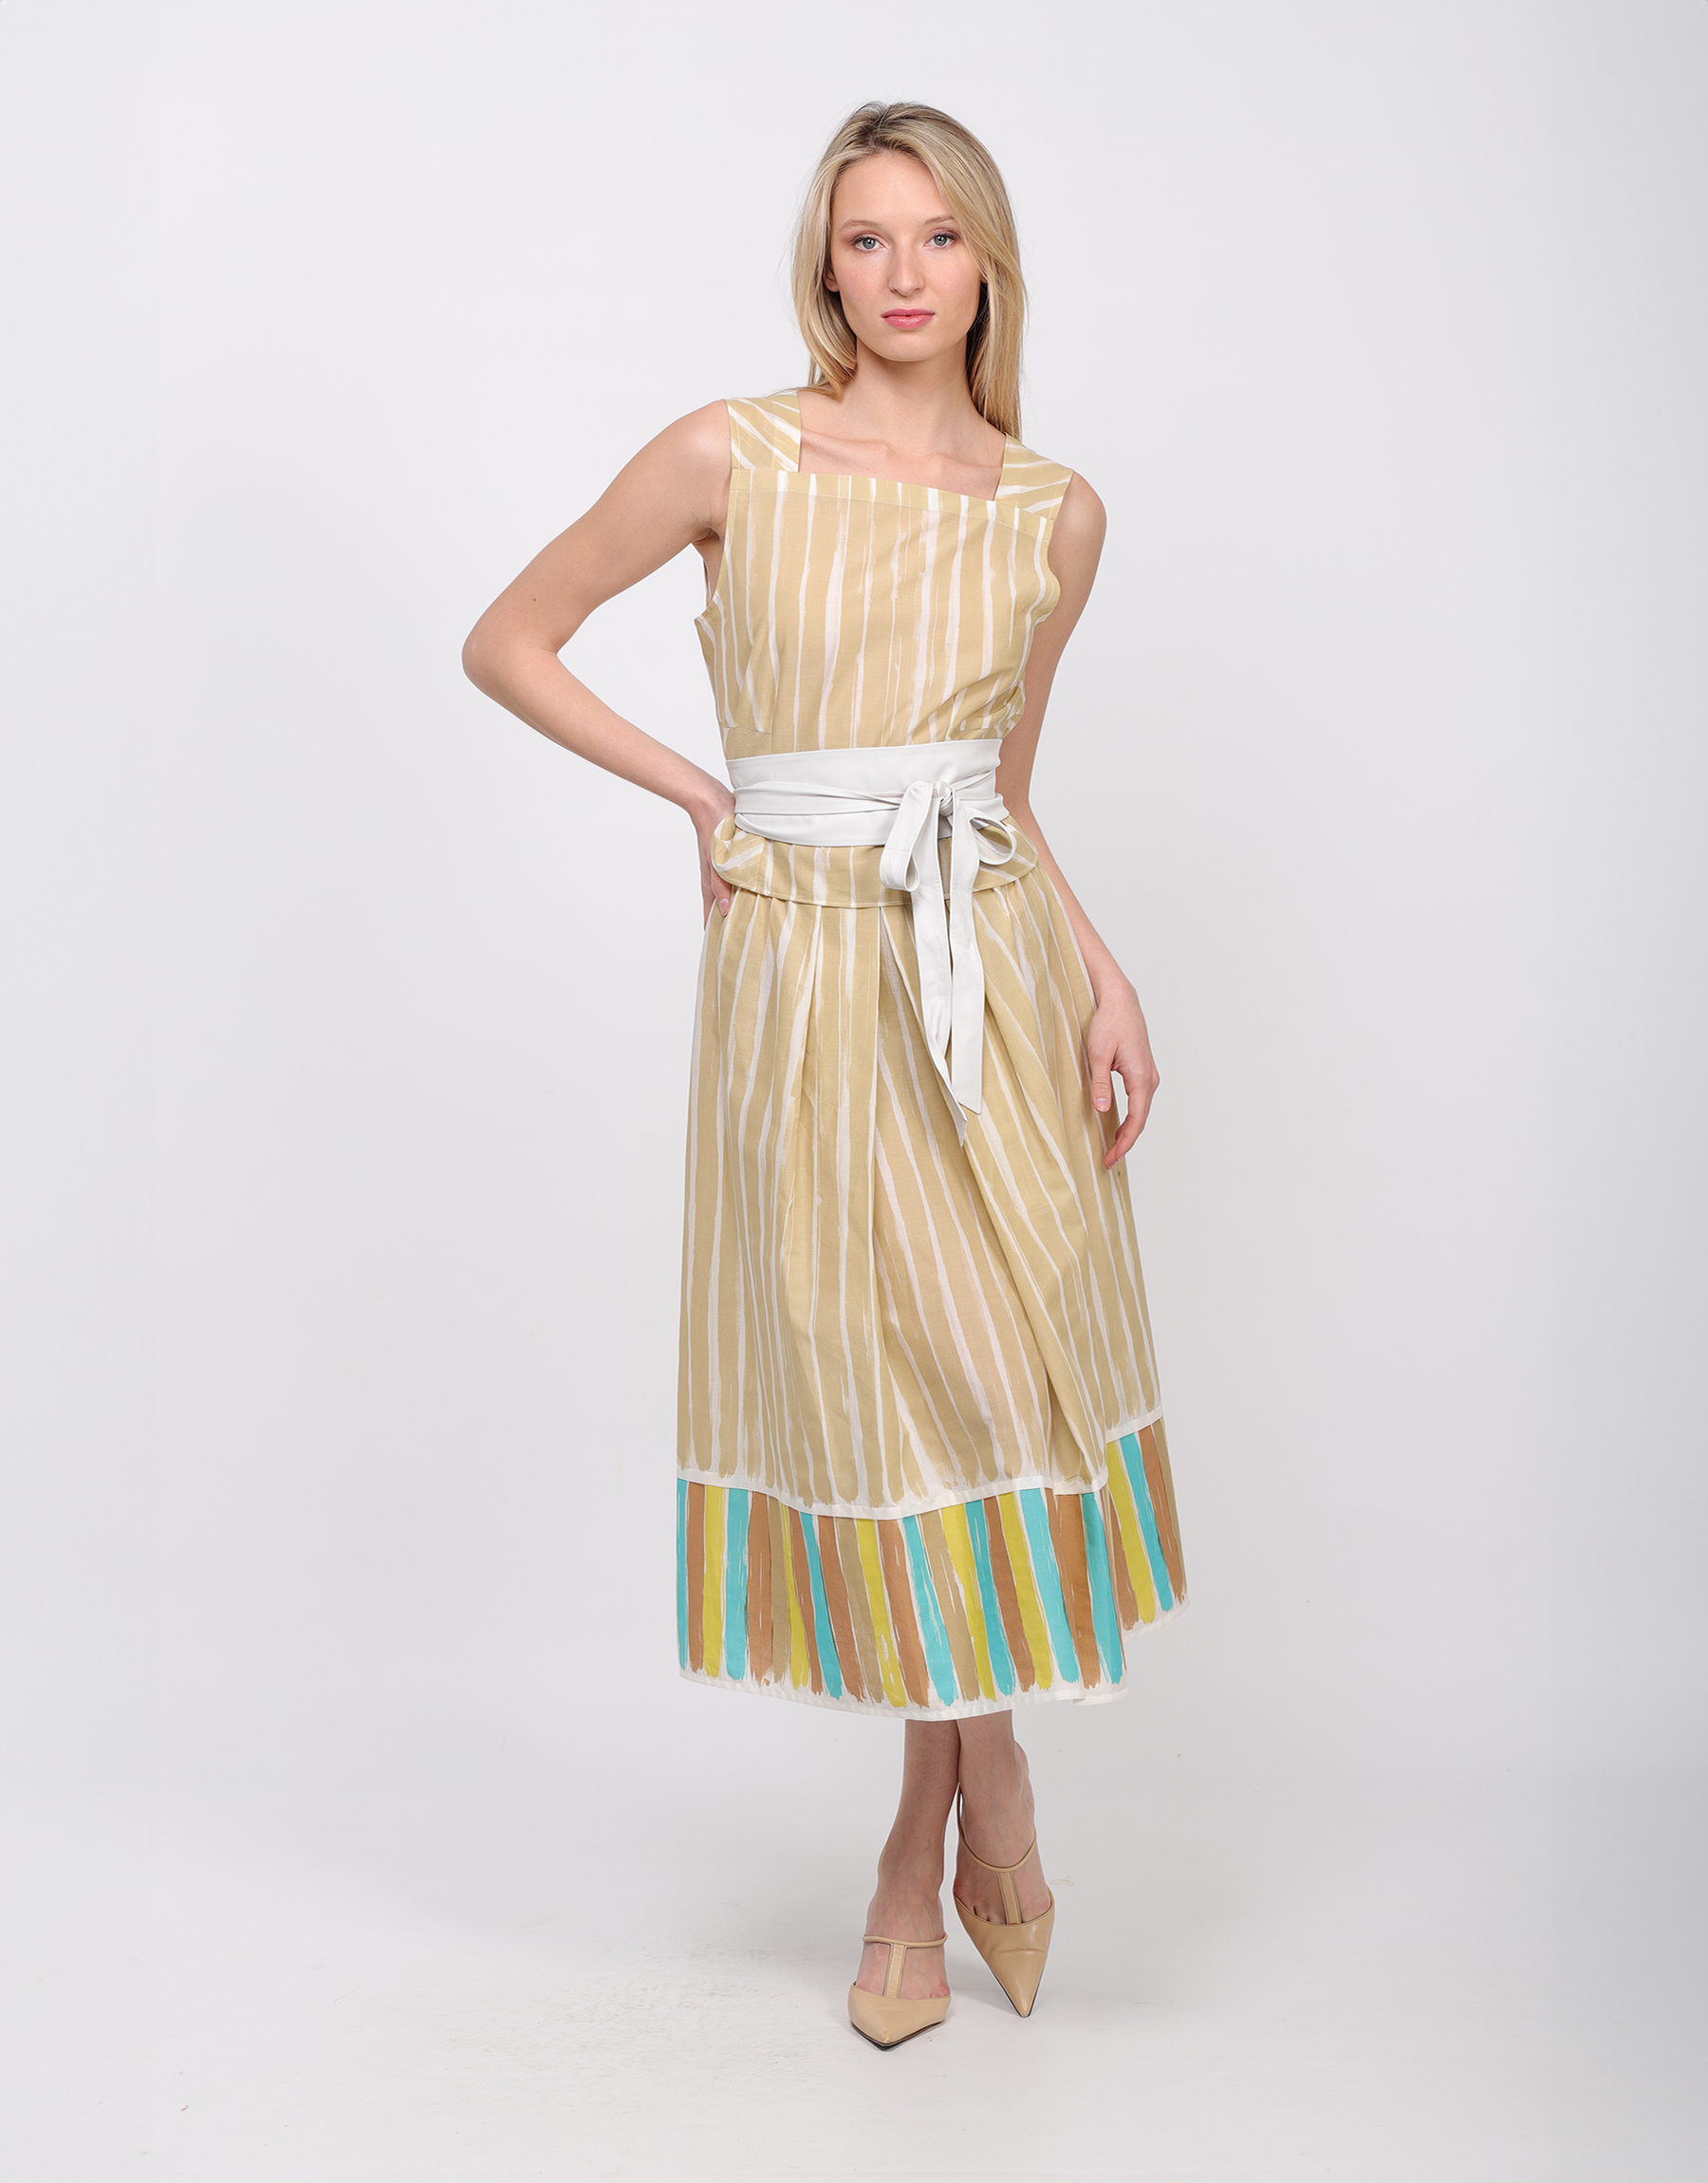 Long pleated skirt in beige and turquoise printed white cotton canvas